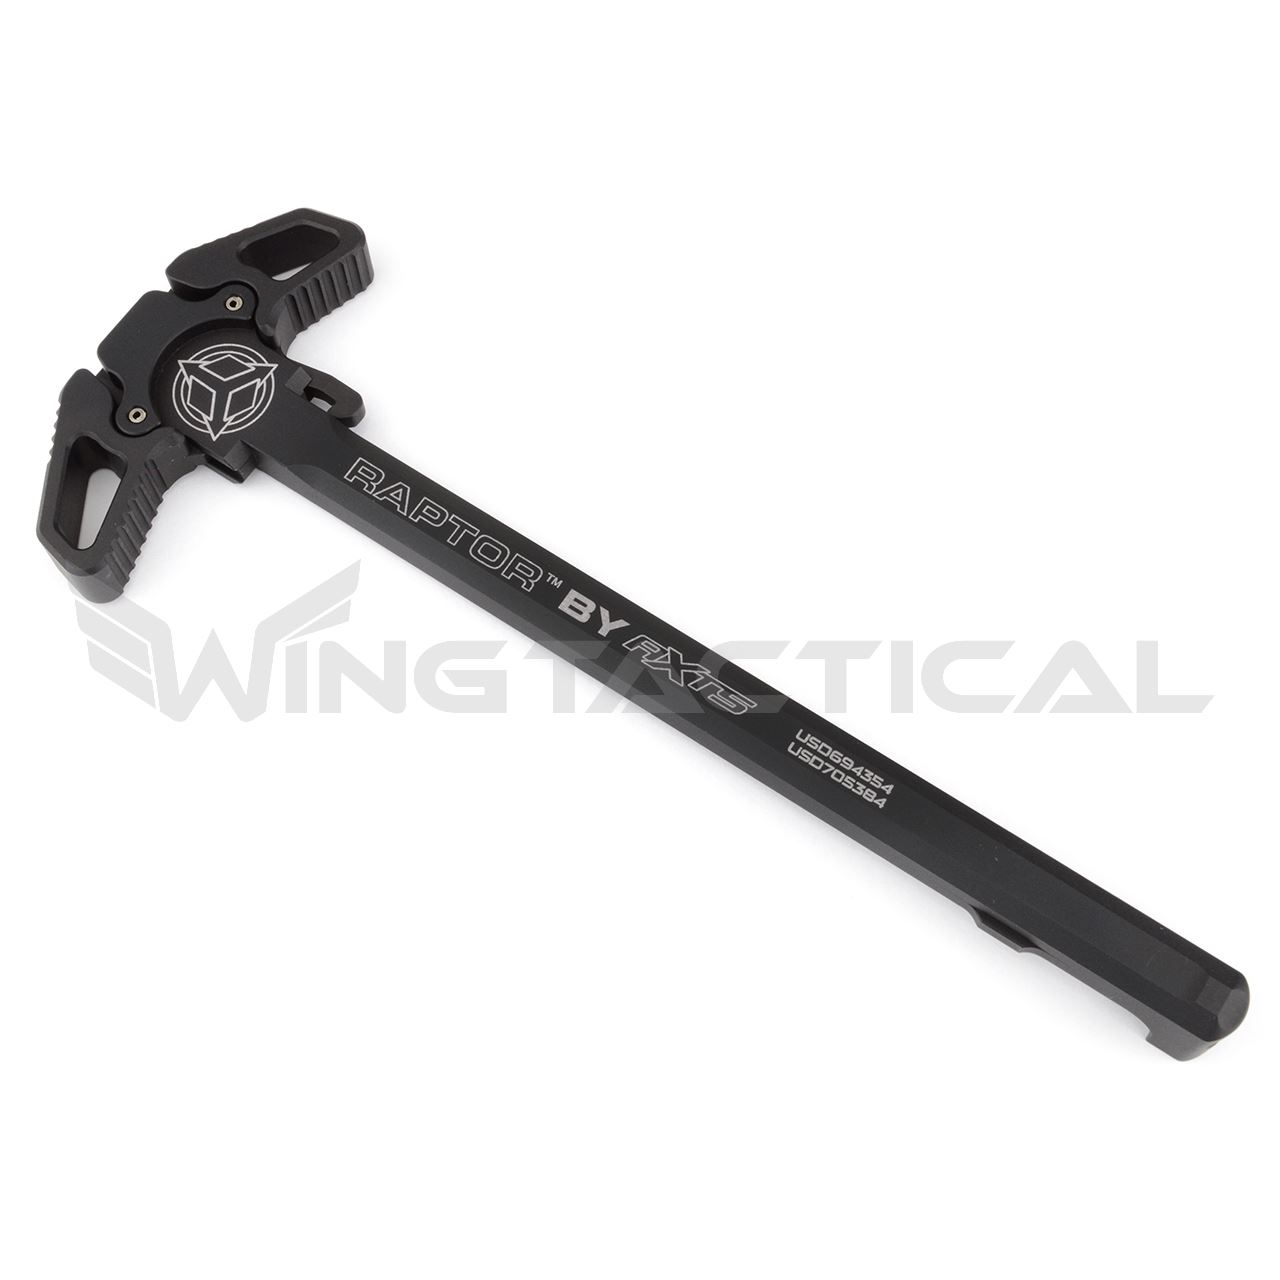 AXTS Raptor AR-15 Ambidextrous Charging Handle with Mil-Spec Type III Hard Coat Anodized